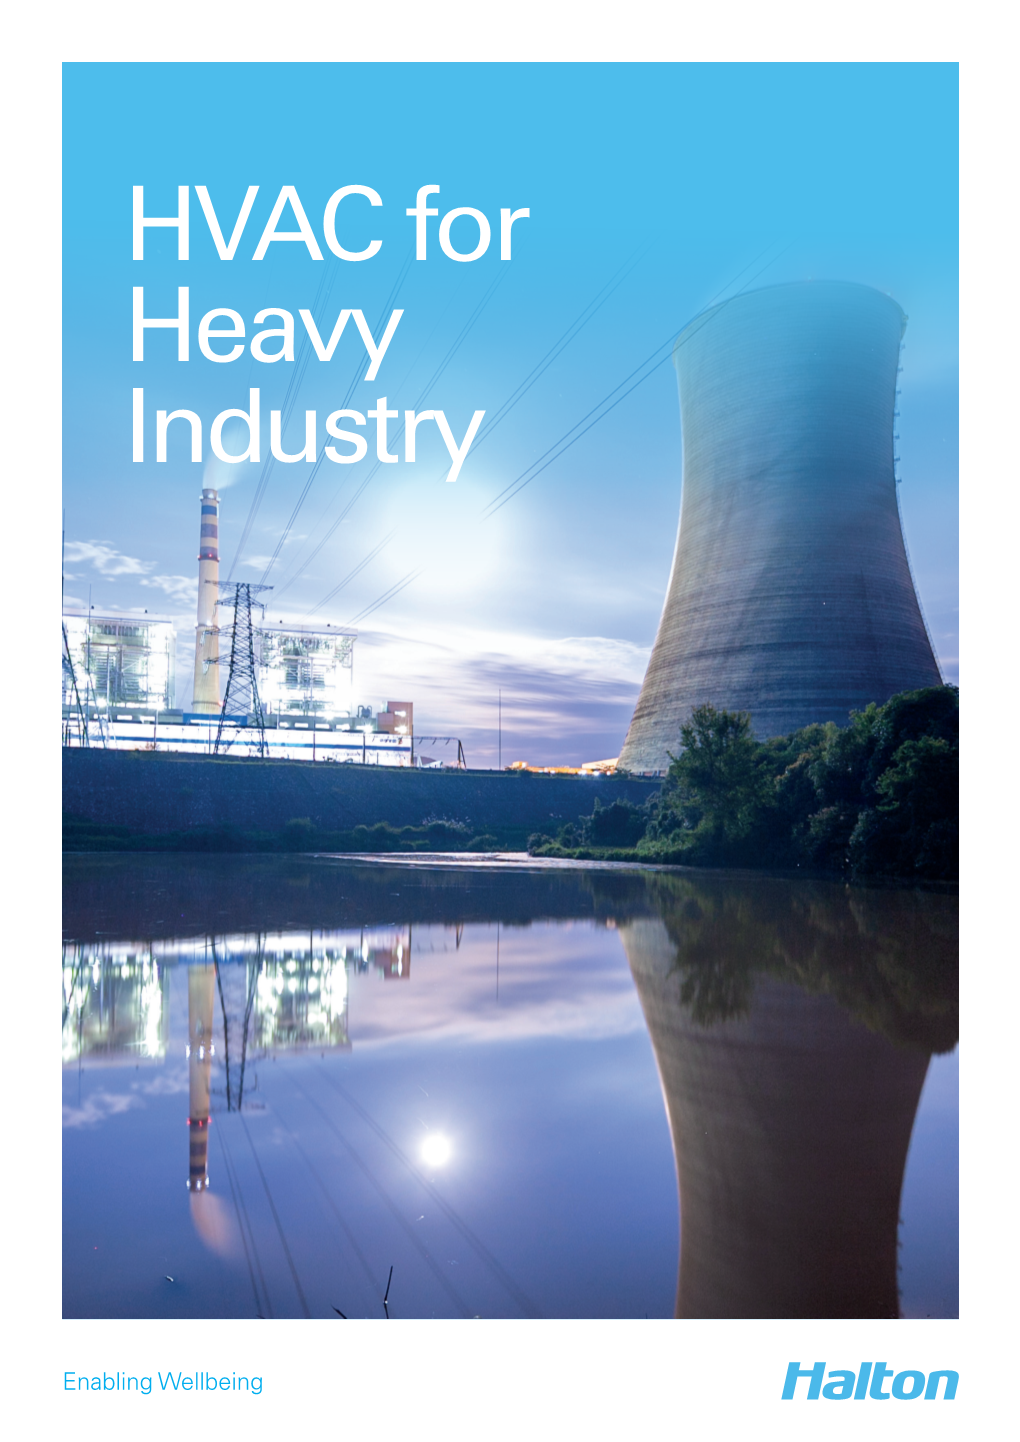 HVAC for Heavy Industry